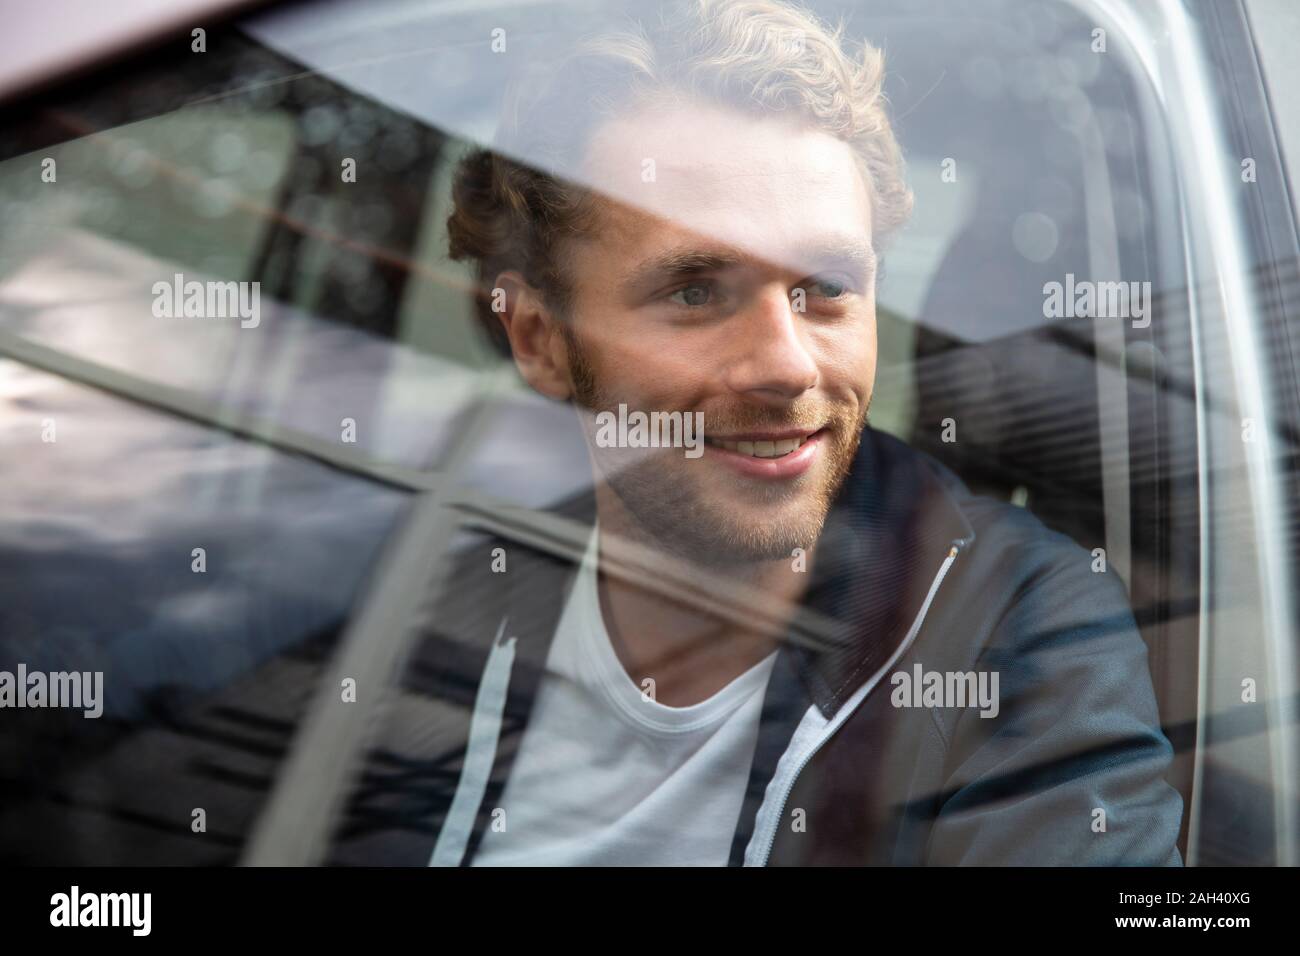 Young man getting out of the car Stock Photo